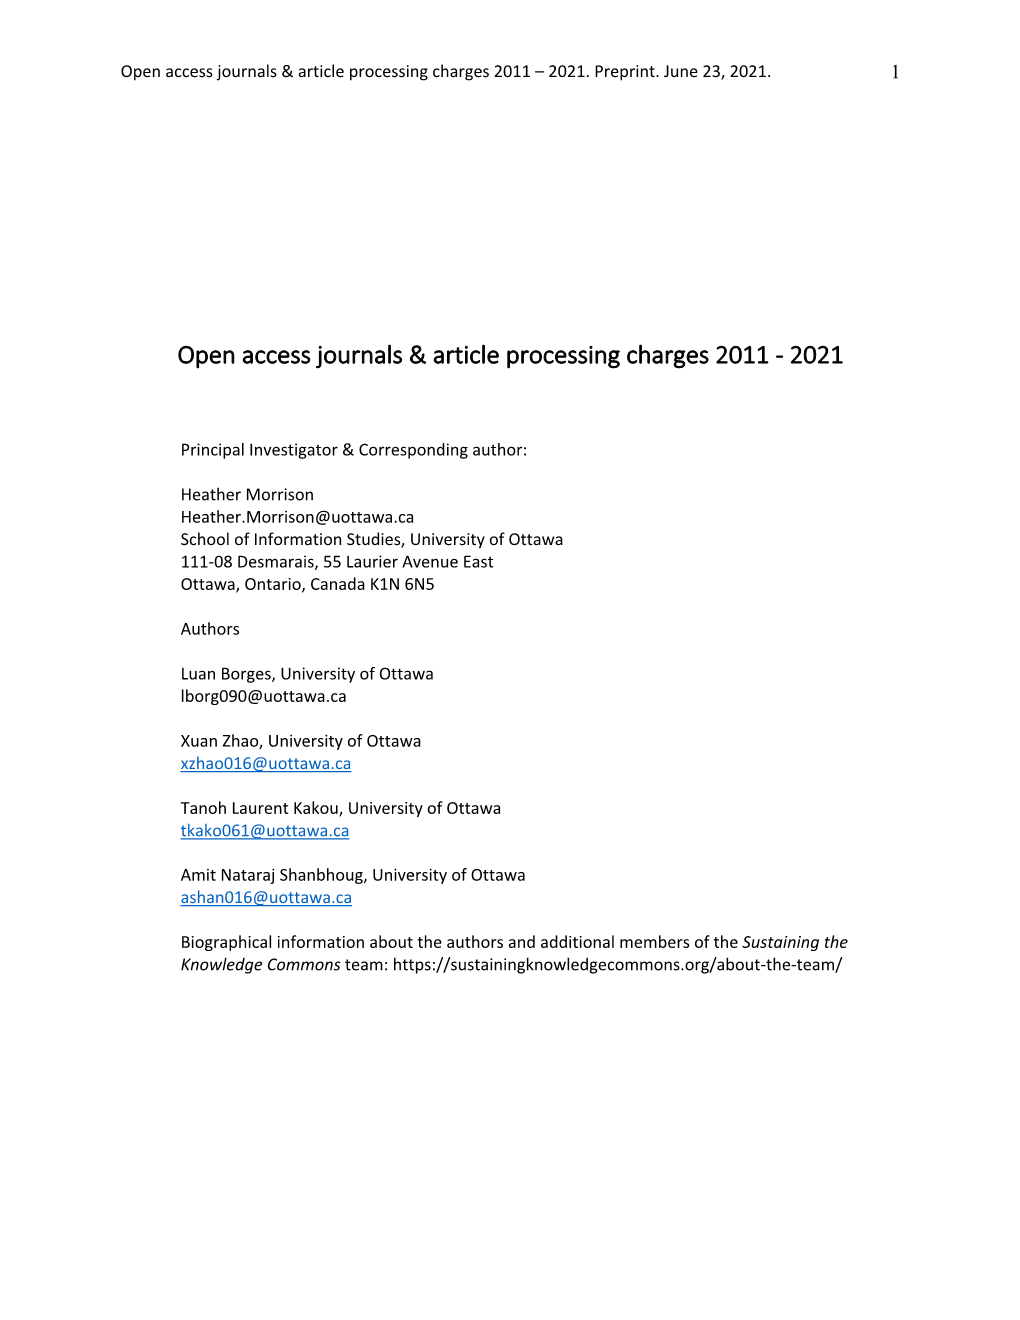 Open Access Journals & Article Processing Charges 2011